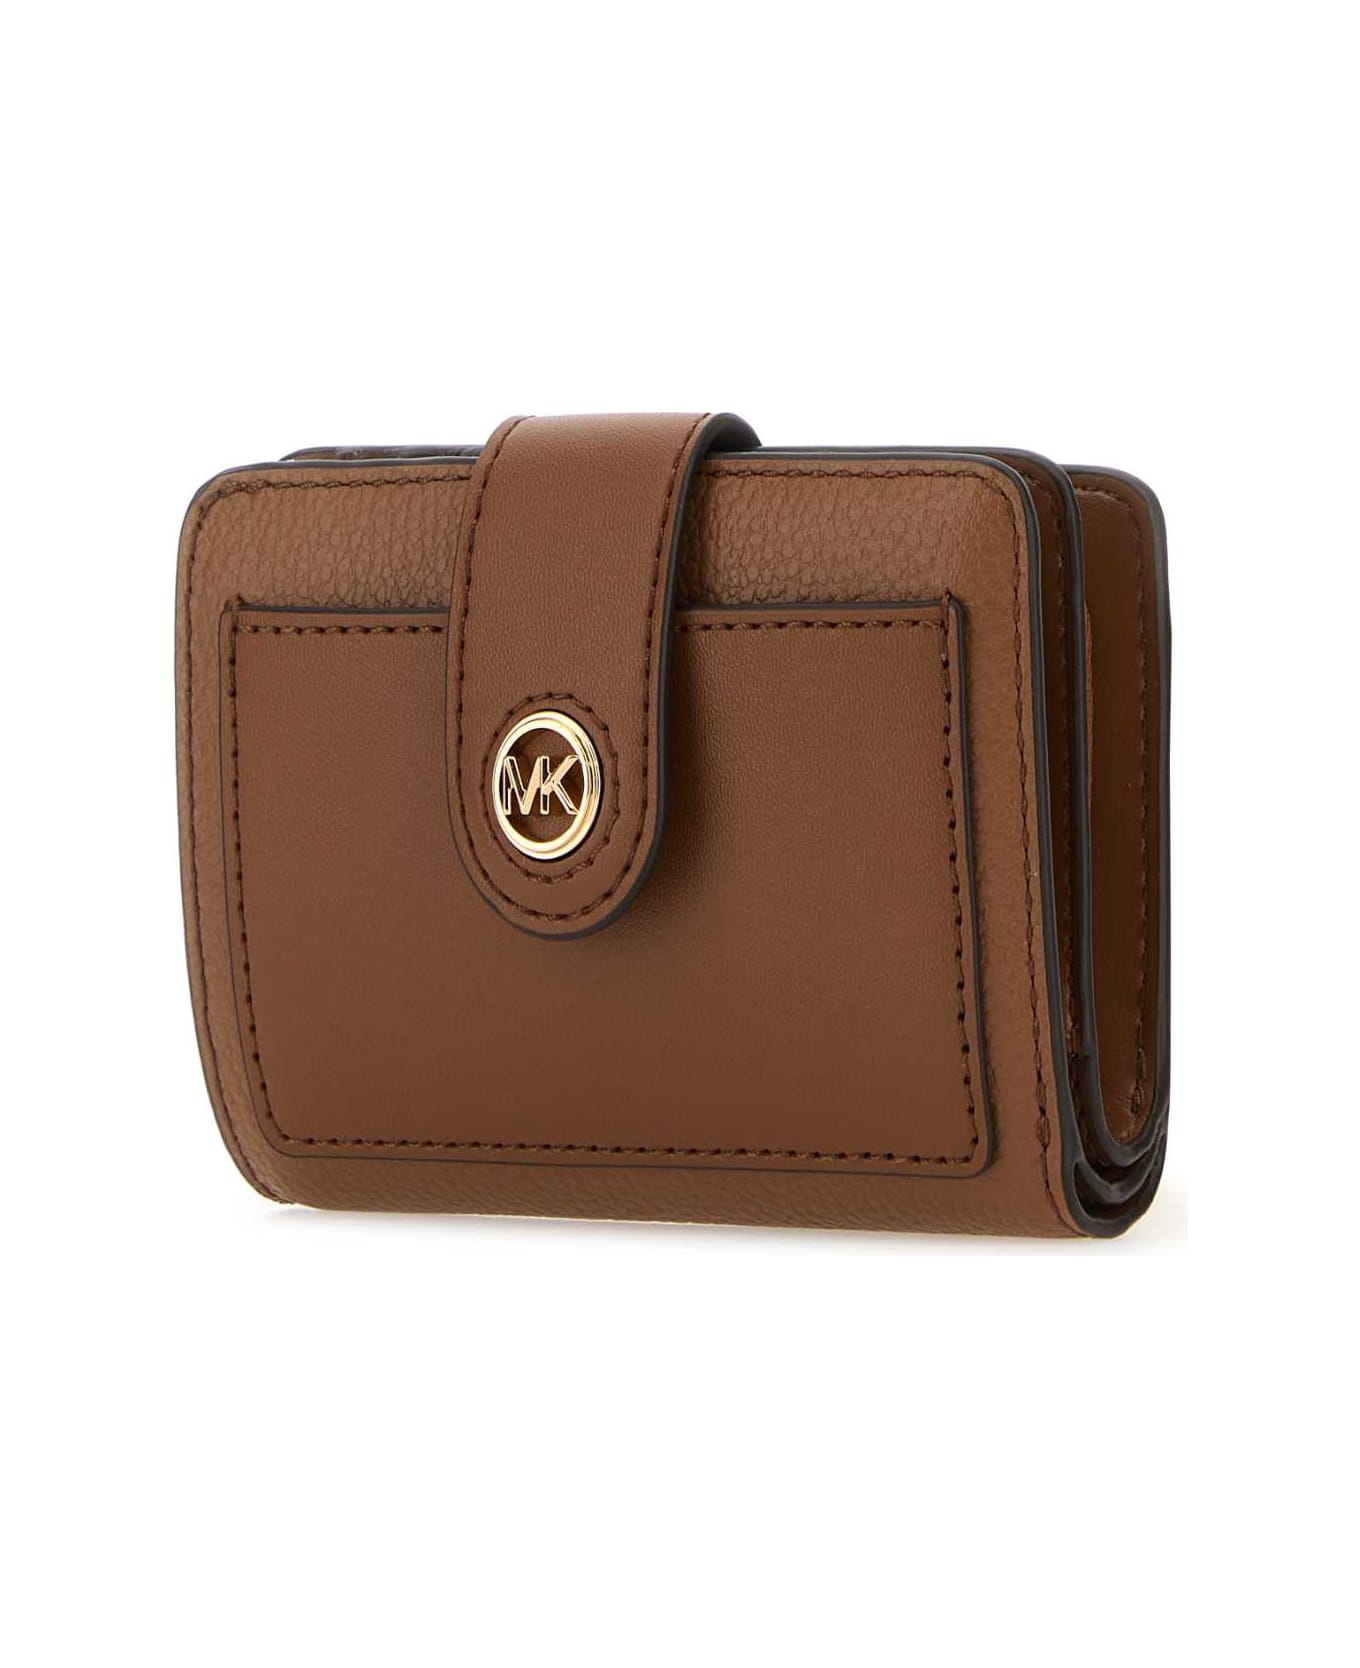 Michael Kors Camel Leather Wallet - LUGGAGE